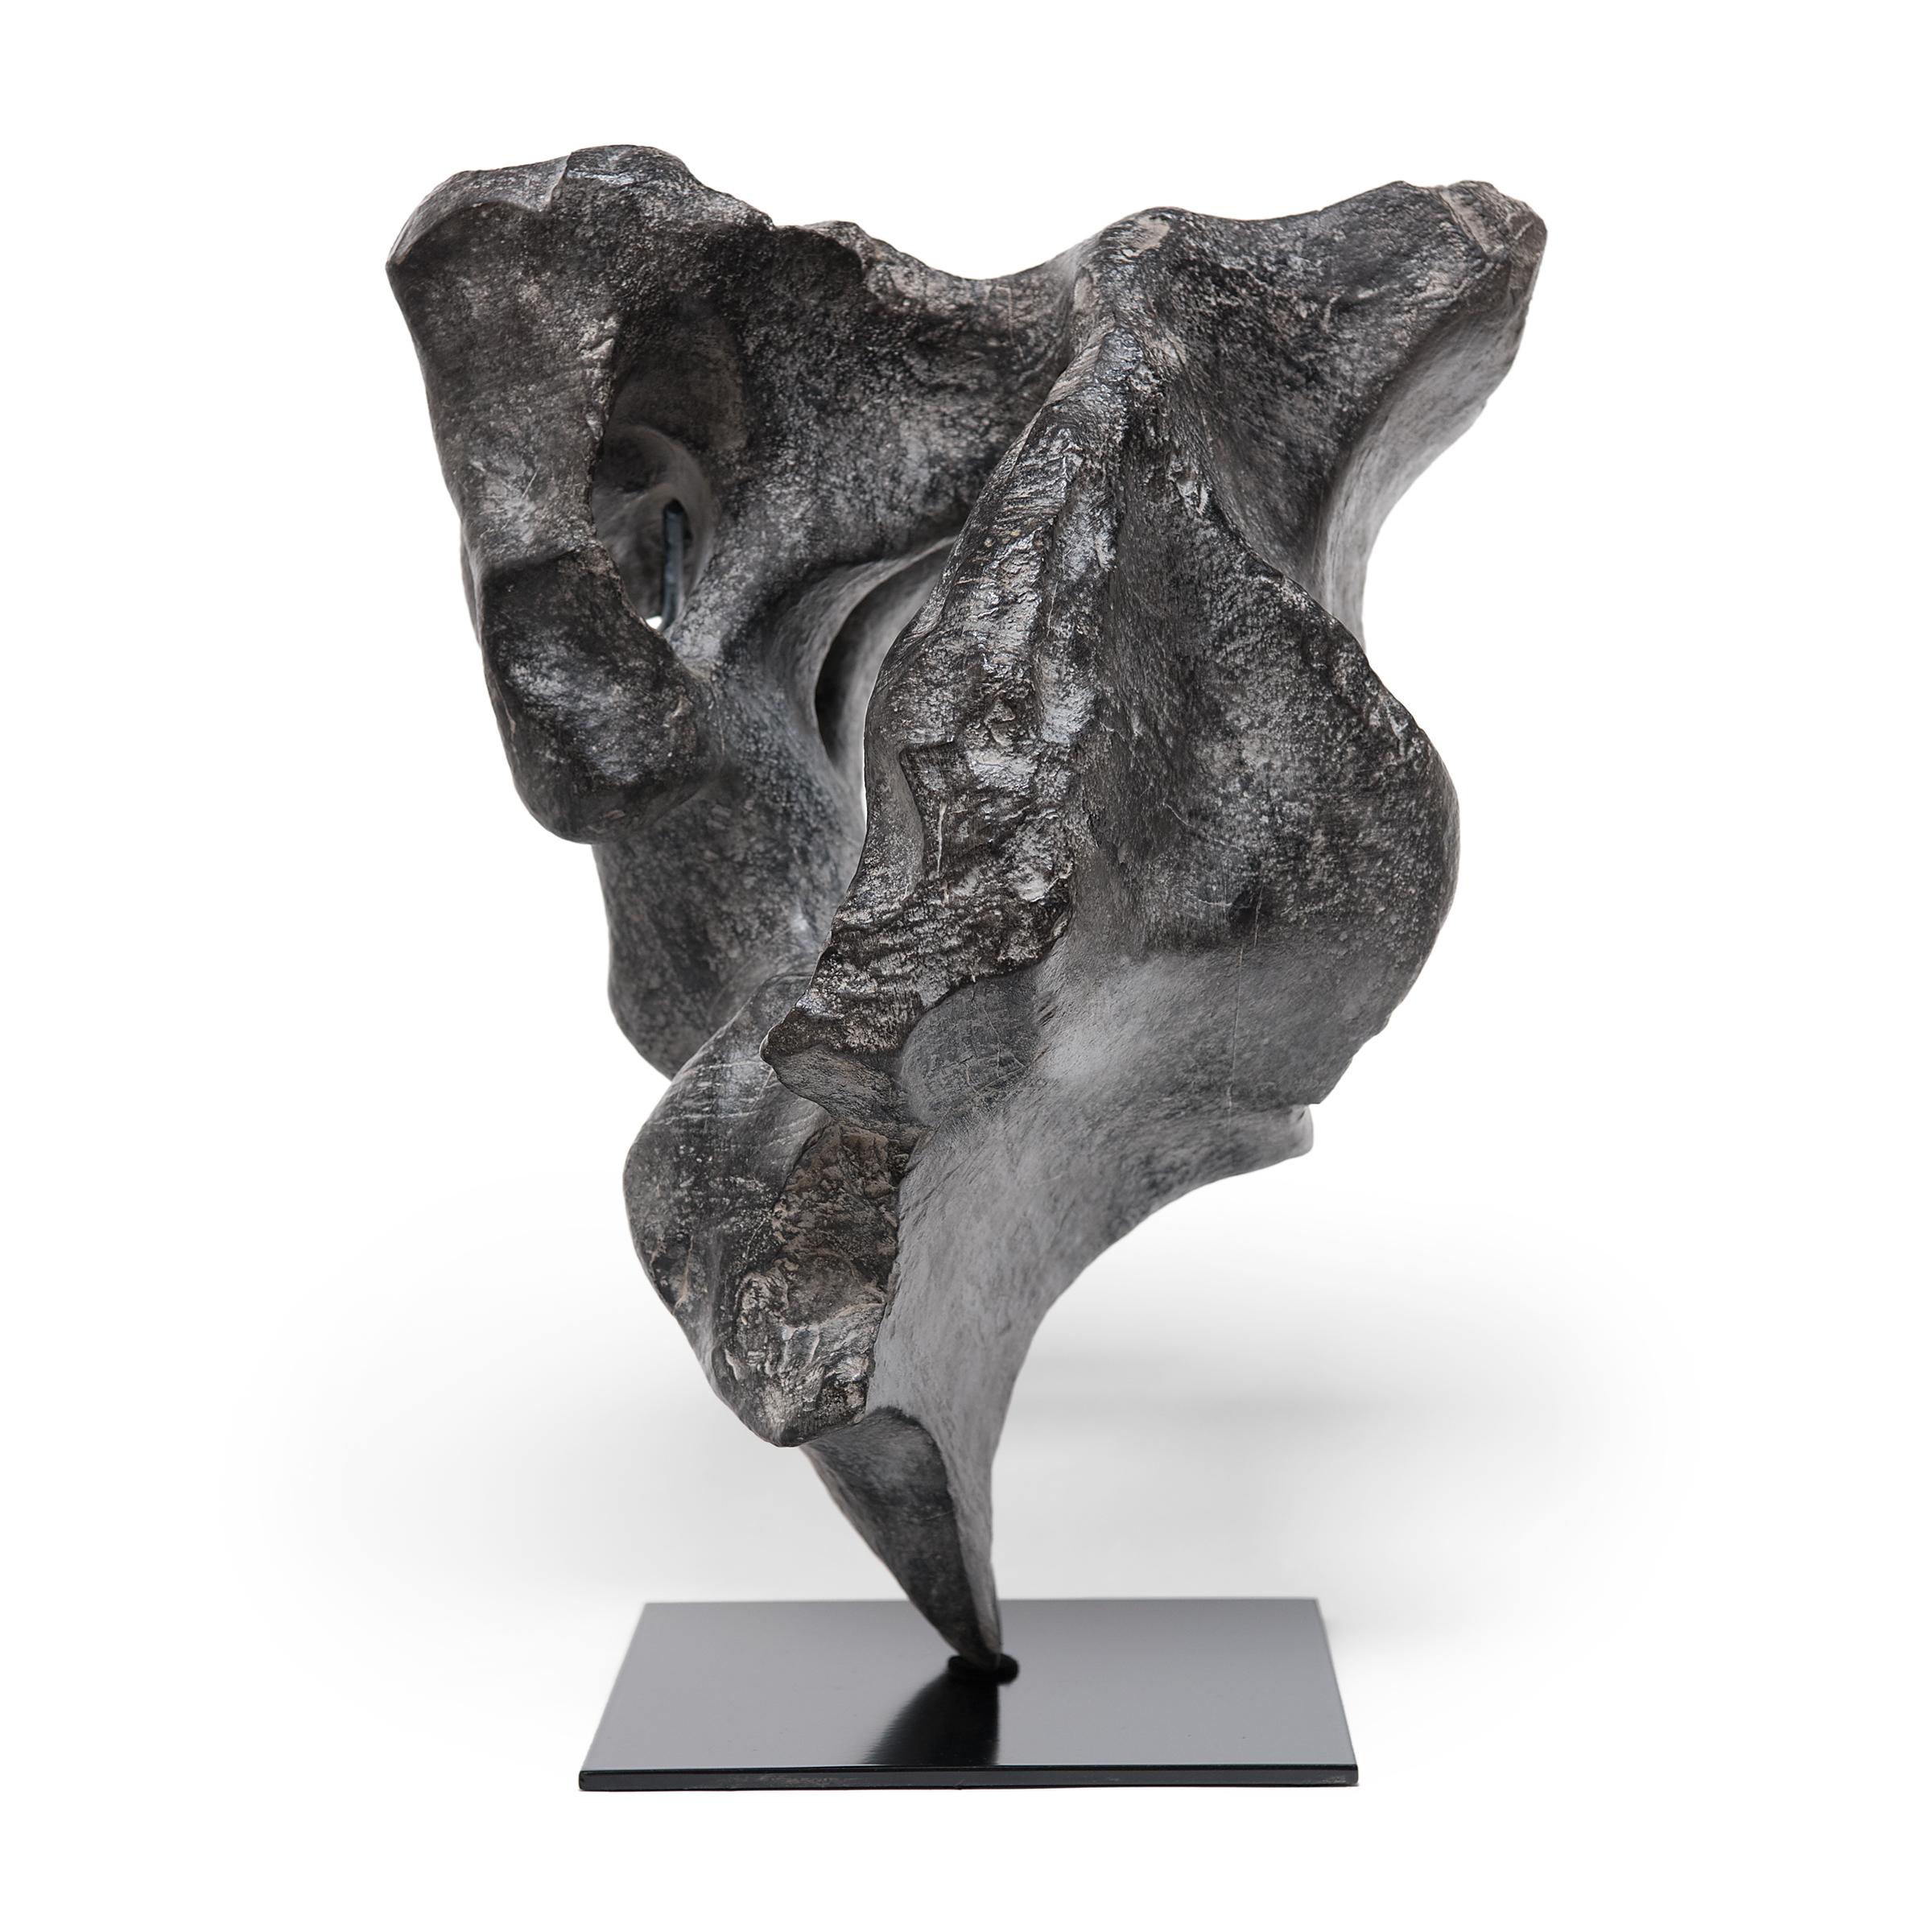 Gracefully balanced on a custom steel base, the unique contours of this lingbi stone inspired its celestial name, 